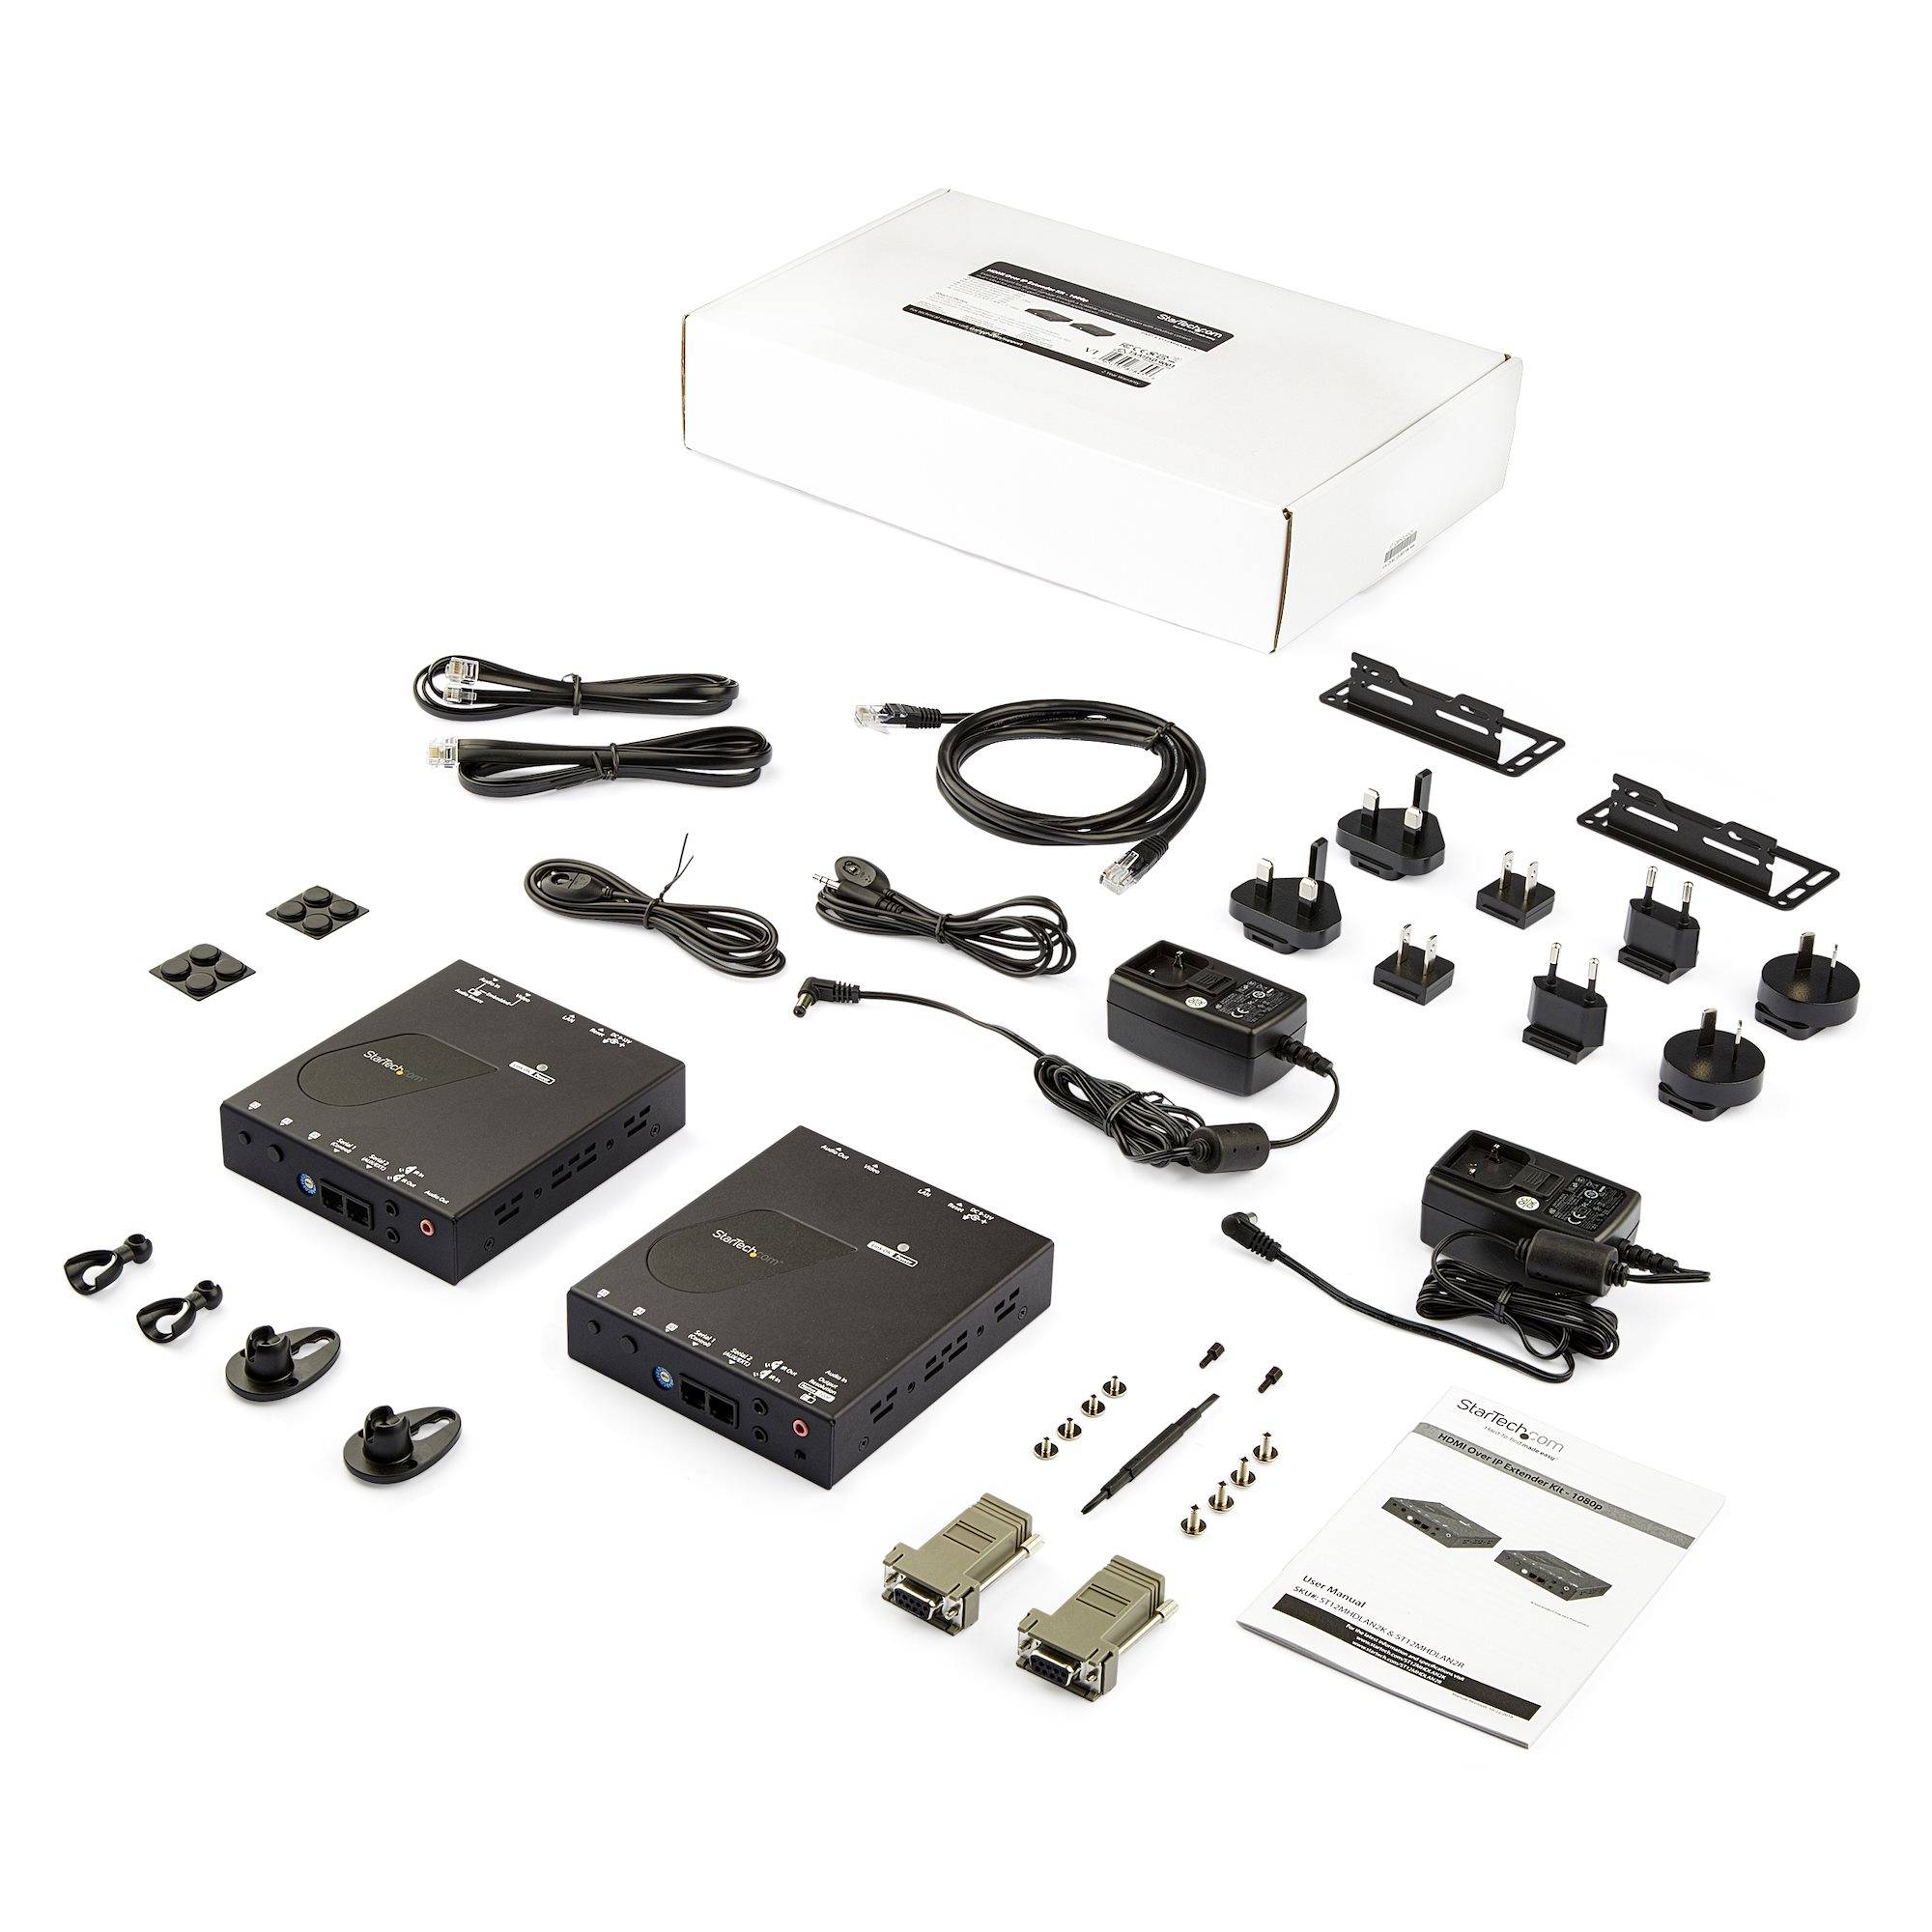 Rca Informatique - image du produit : HDMI OVER IP EXTENDER KIT WITH VIDEO WALL SUPPORT - 1080P